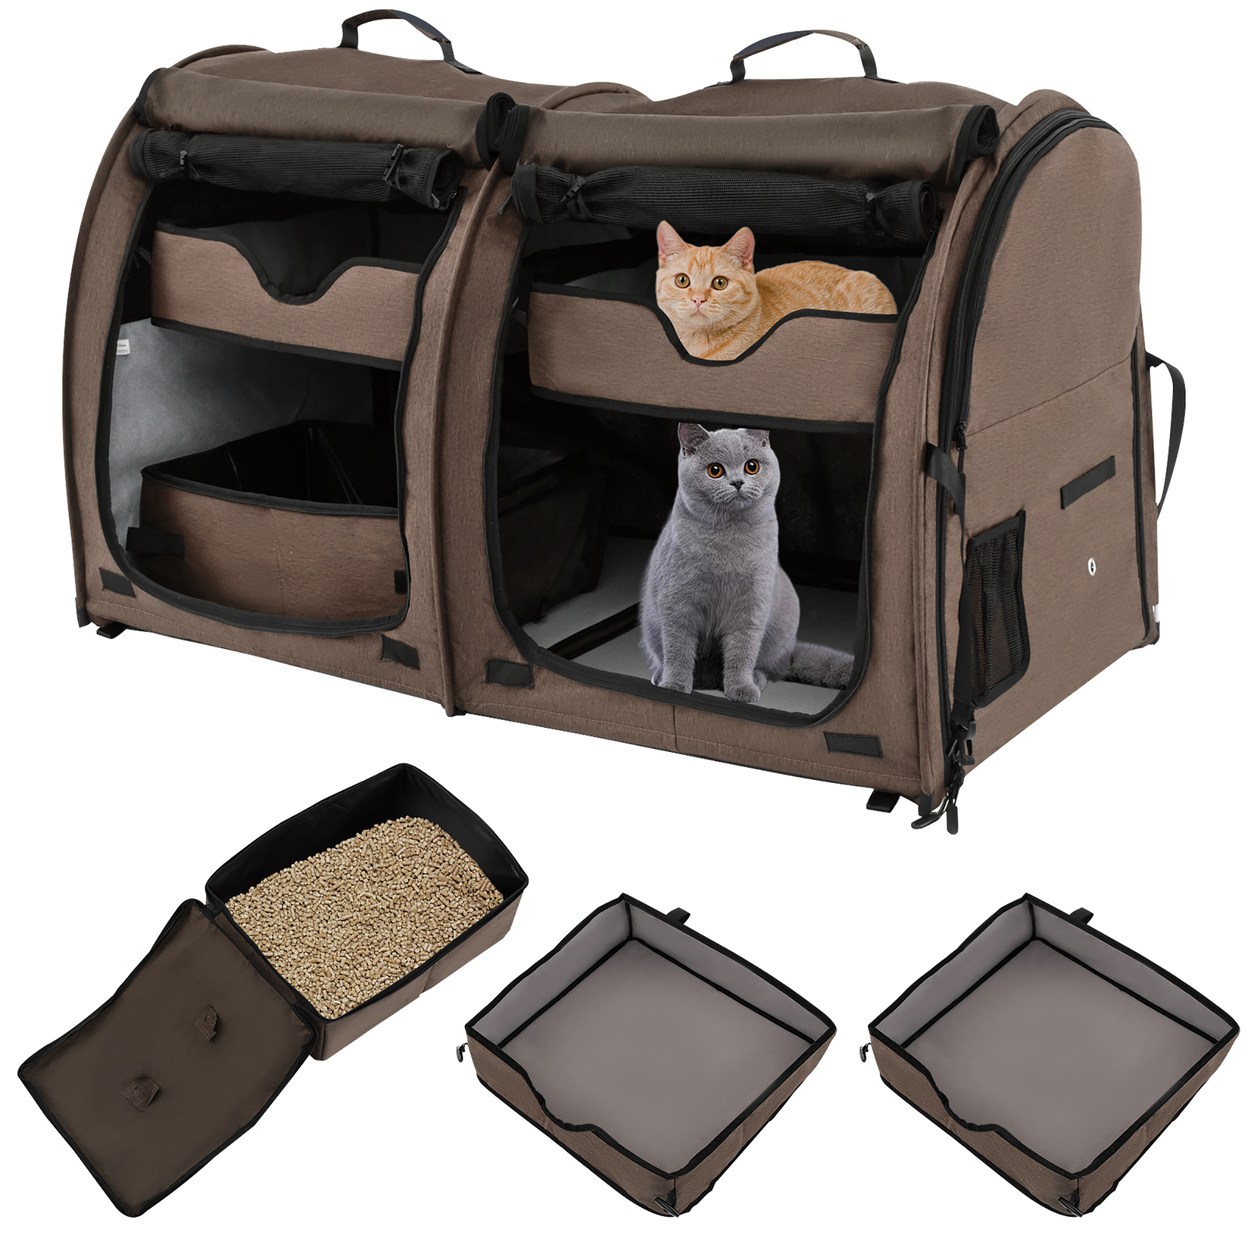 Portable Pet Carrier Kennel Cat Dog Crate Twin Compartments W/ Mats Litter Box Brown